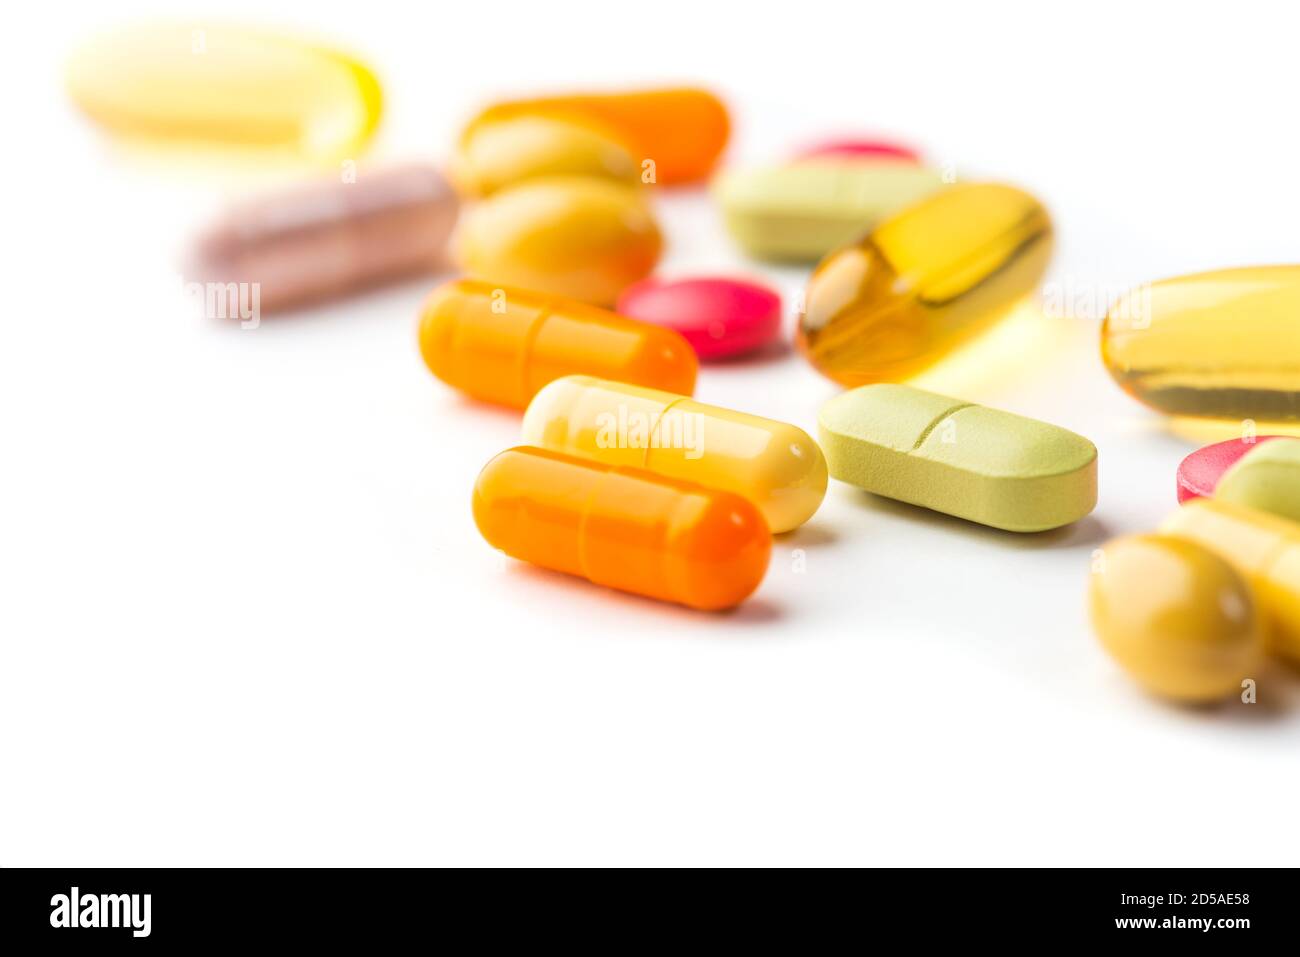 Selective focus on colorful medication and pills on white background Stock Photo